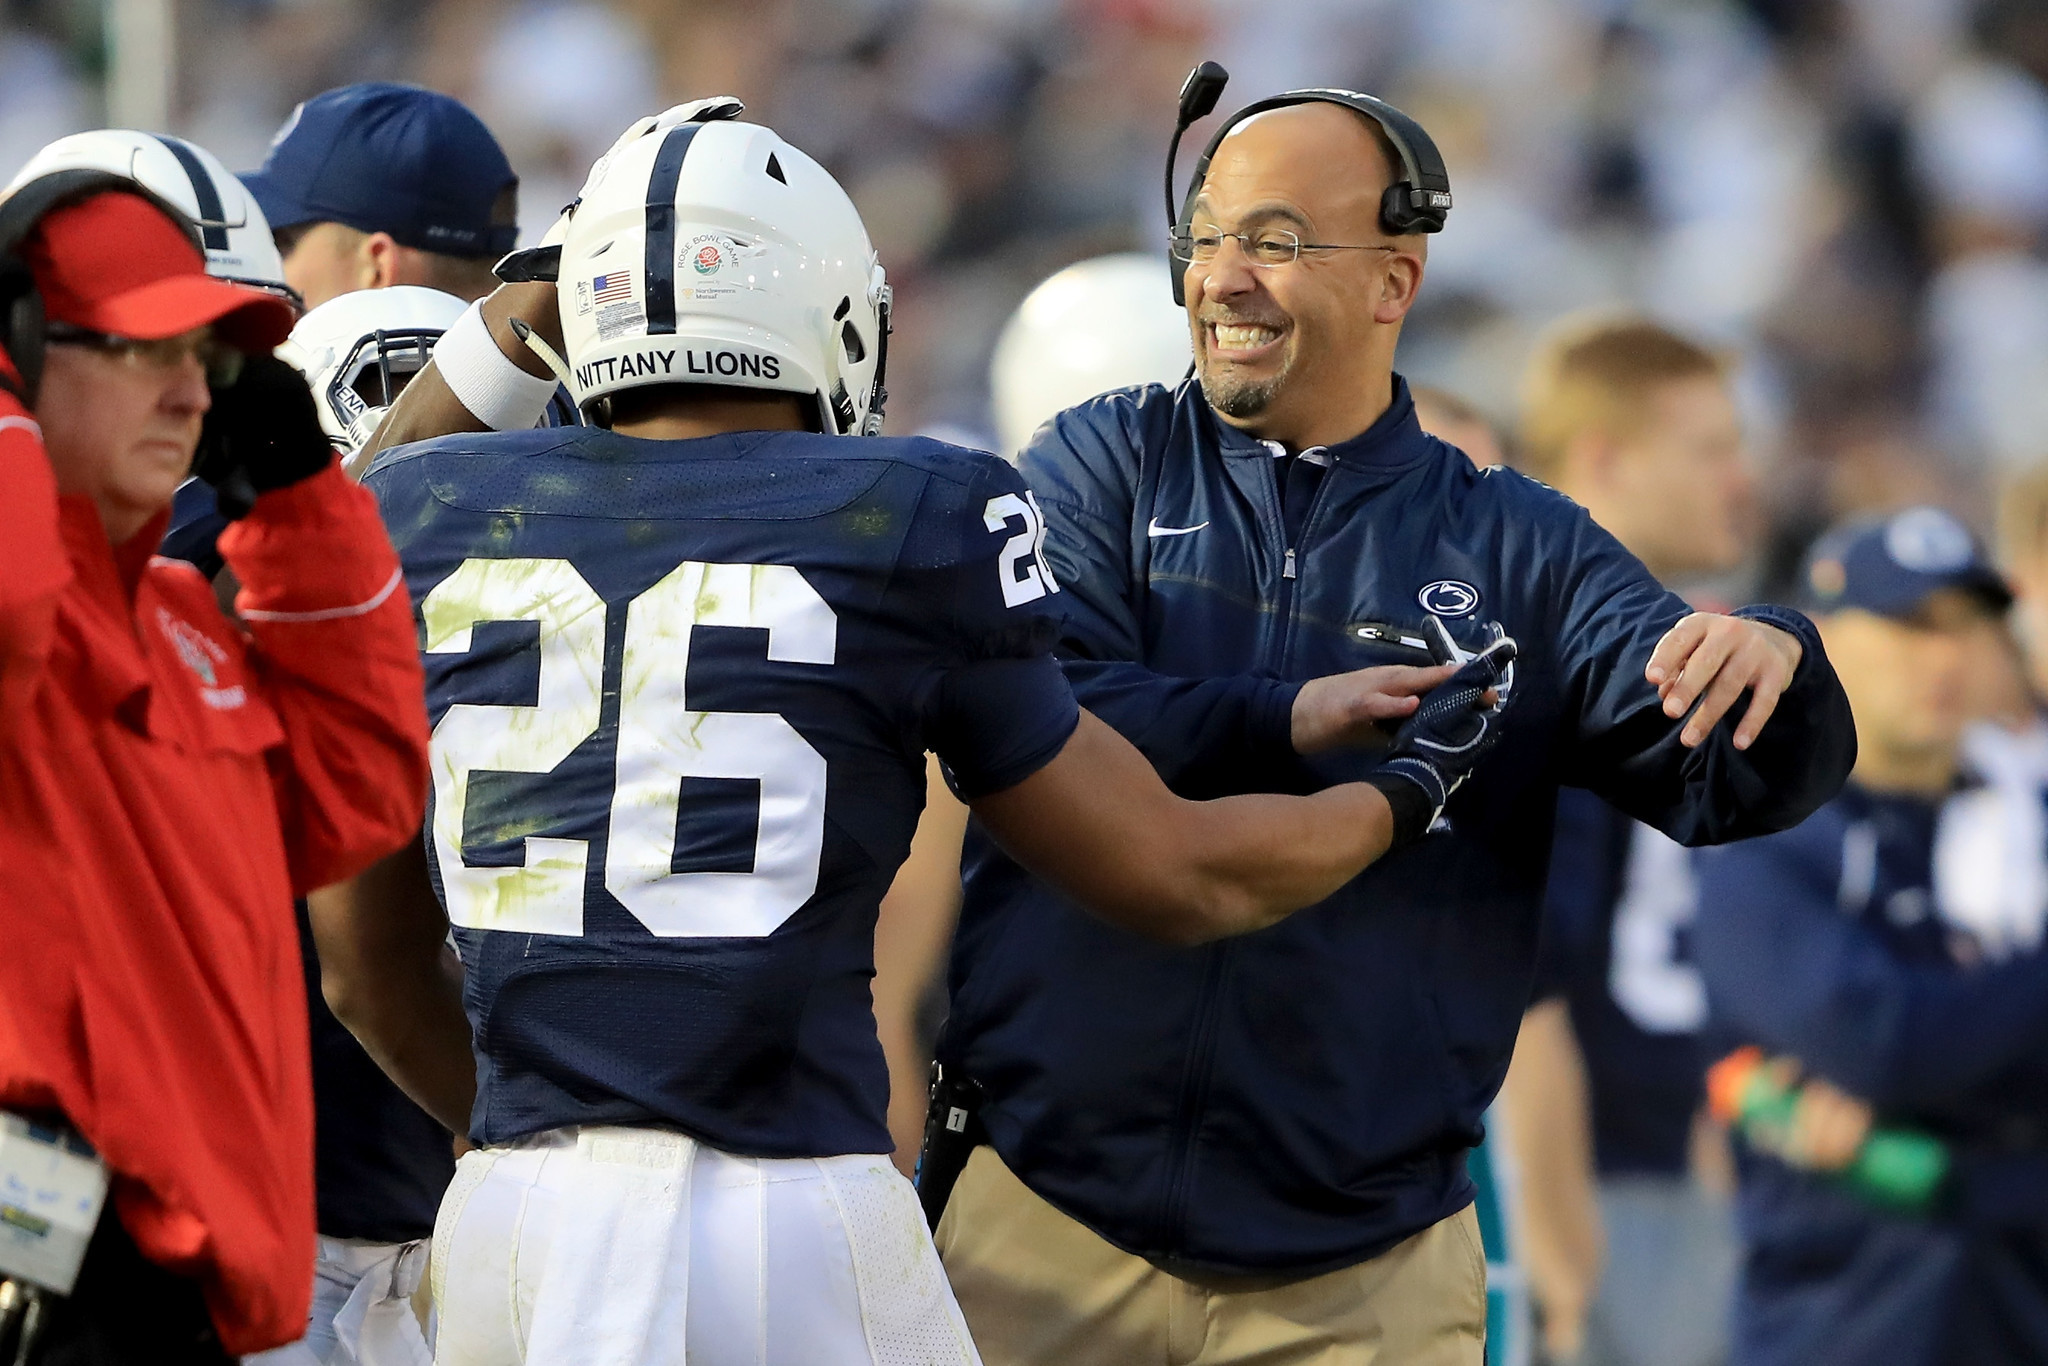 mc-penn-state-s-james-franklin-wins-another-national-coaching-award-20170110